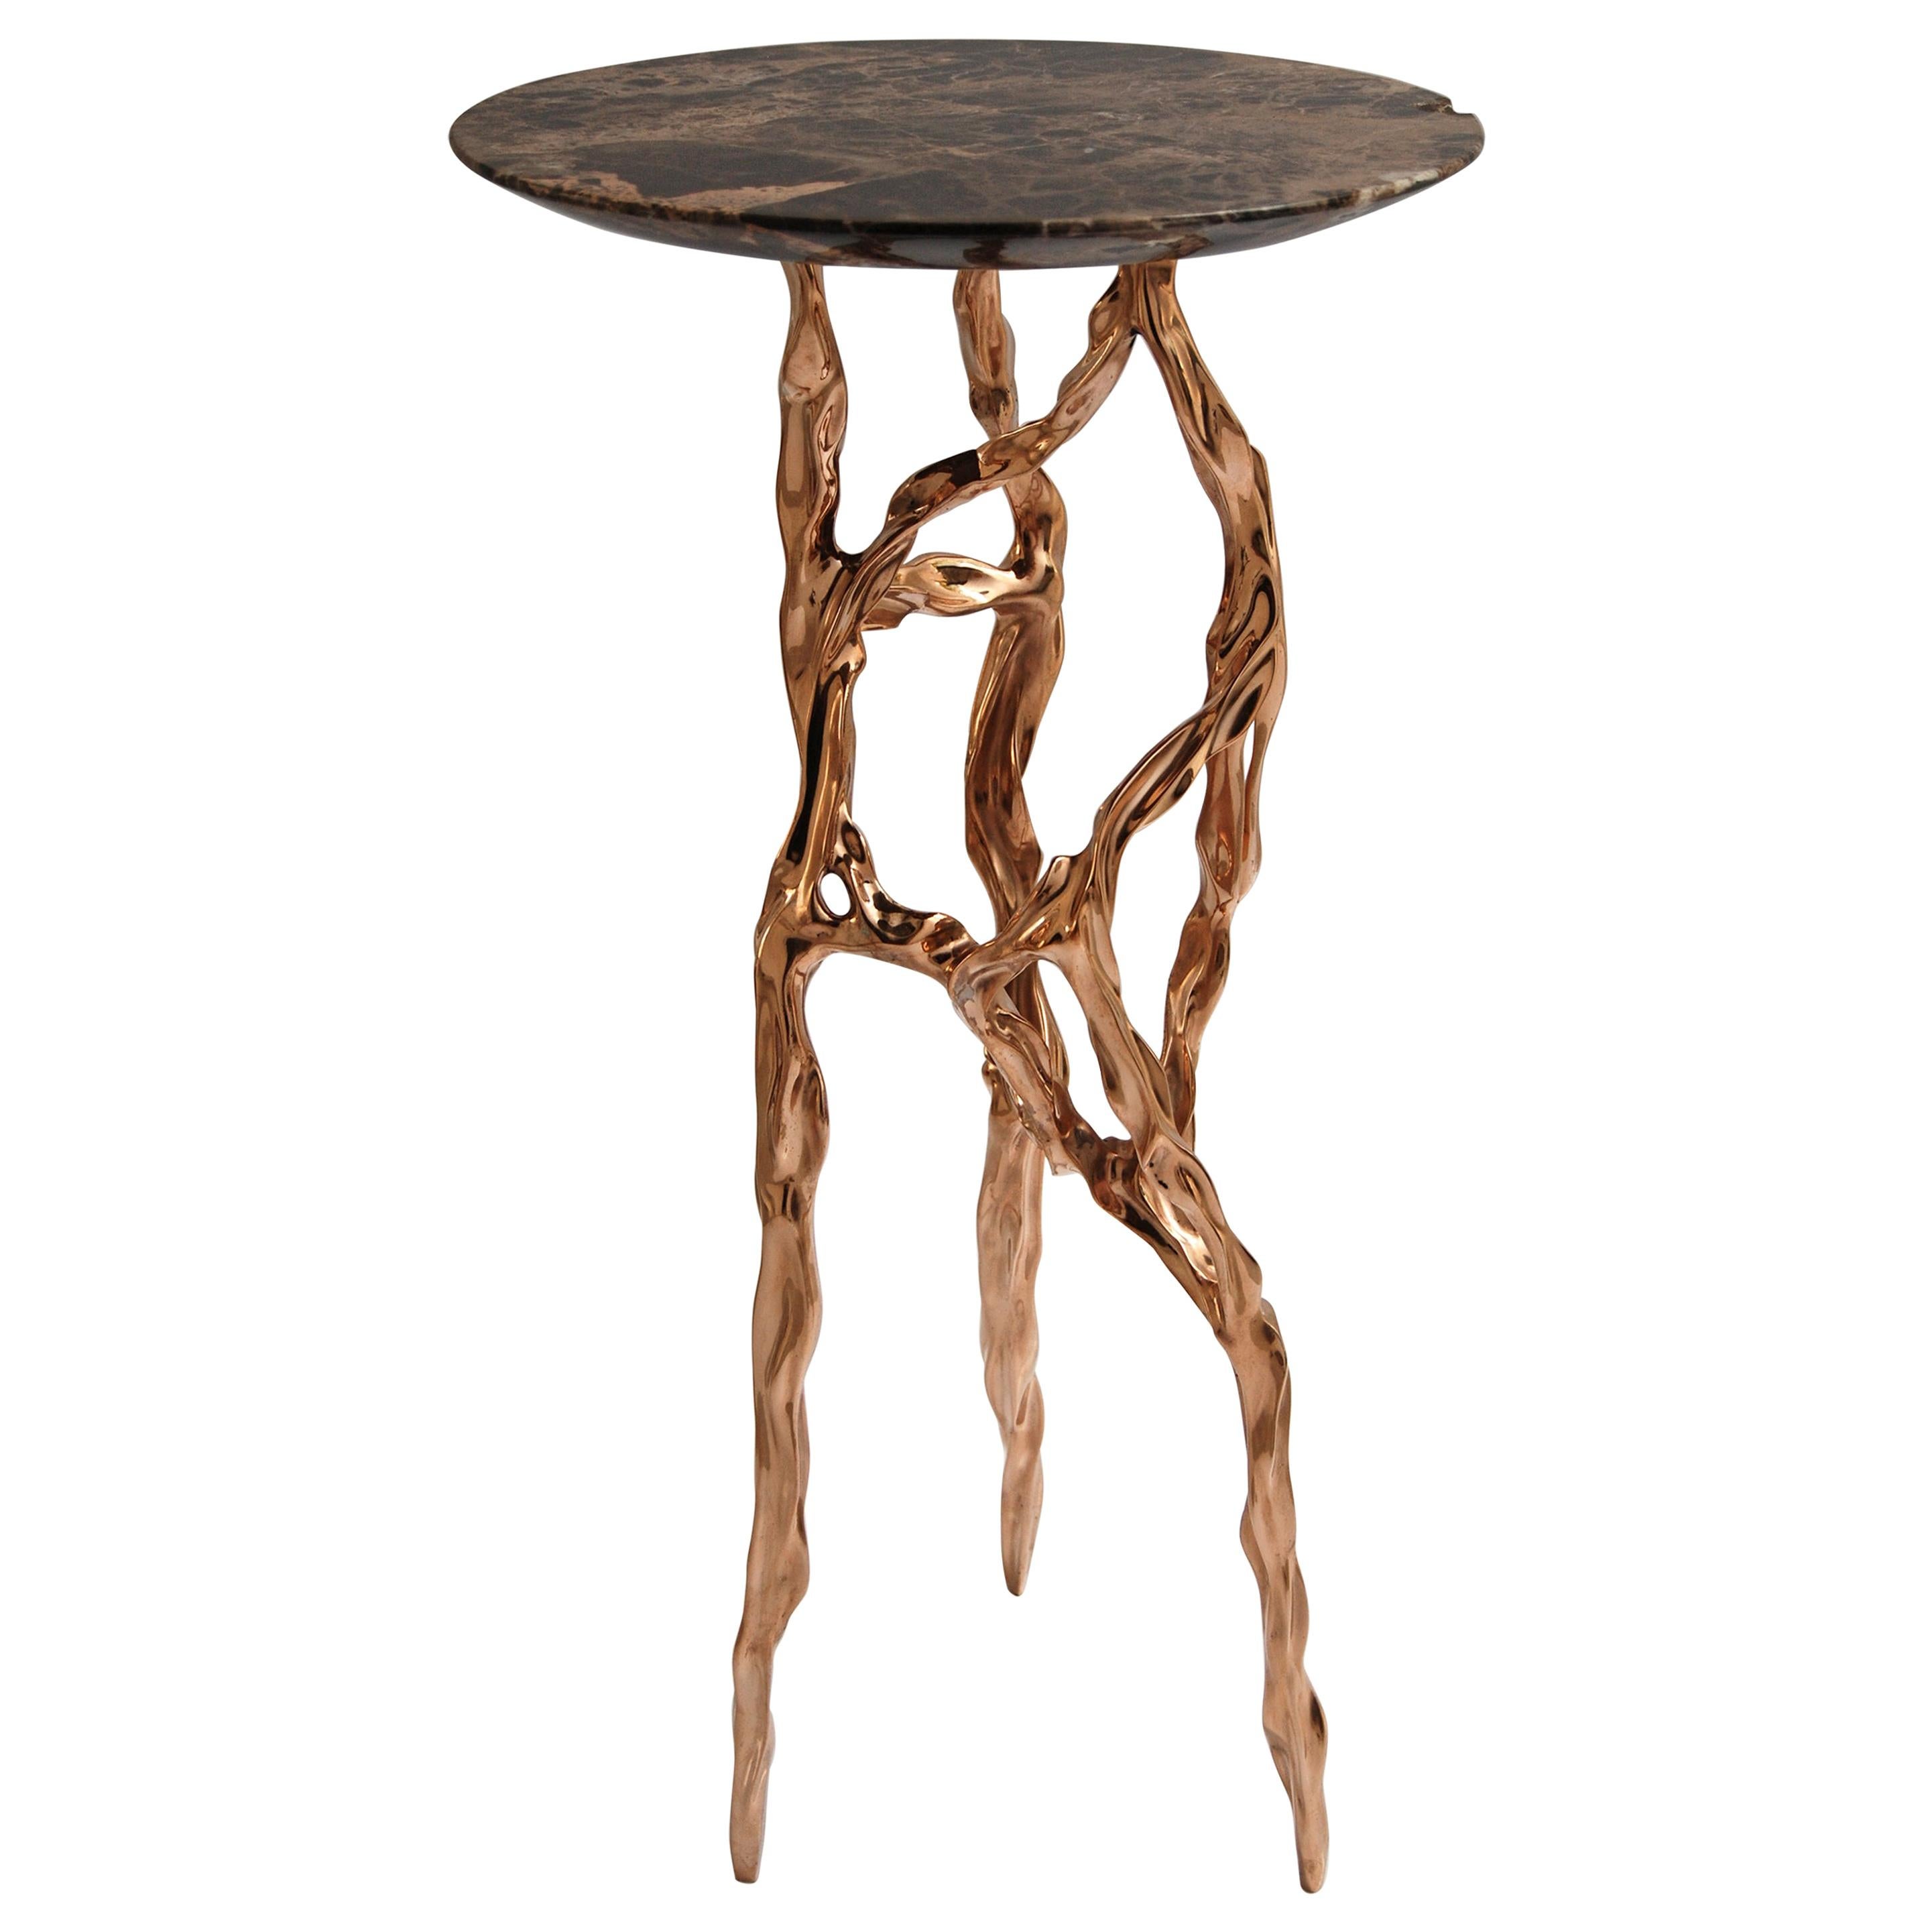 Polished Bronze Side Table with Marquina Marble Top by Fakasaka Design